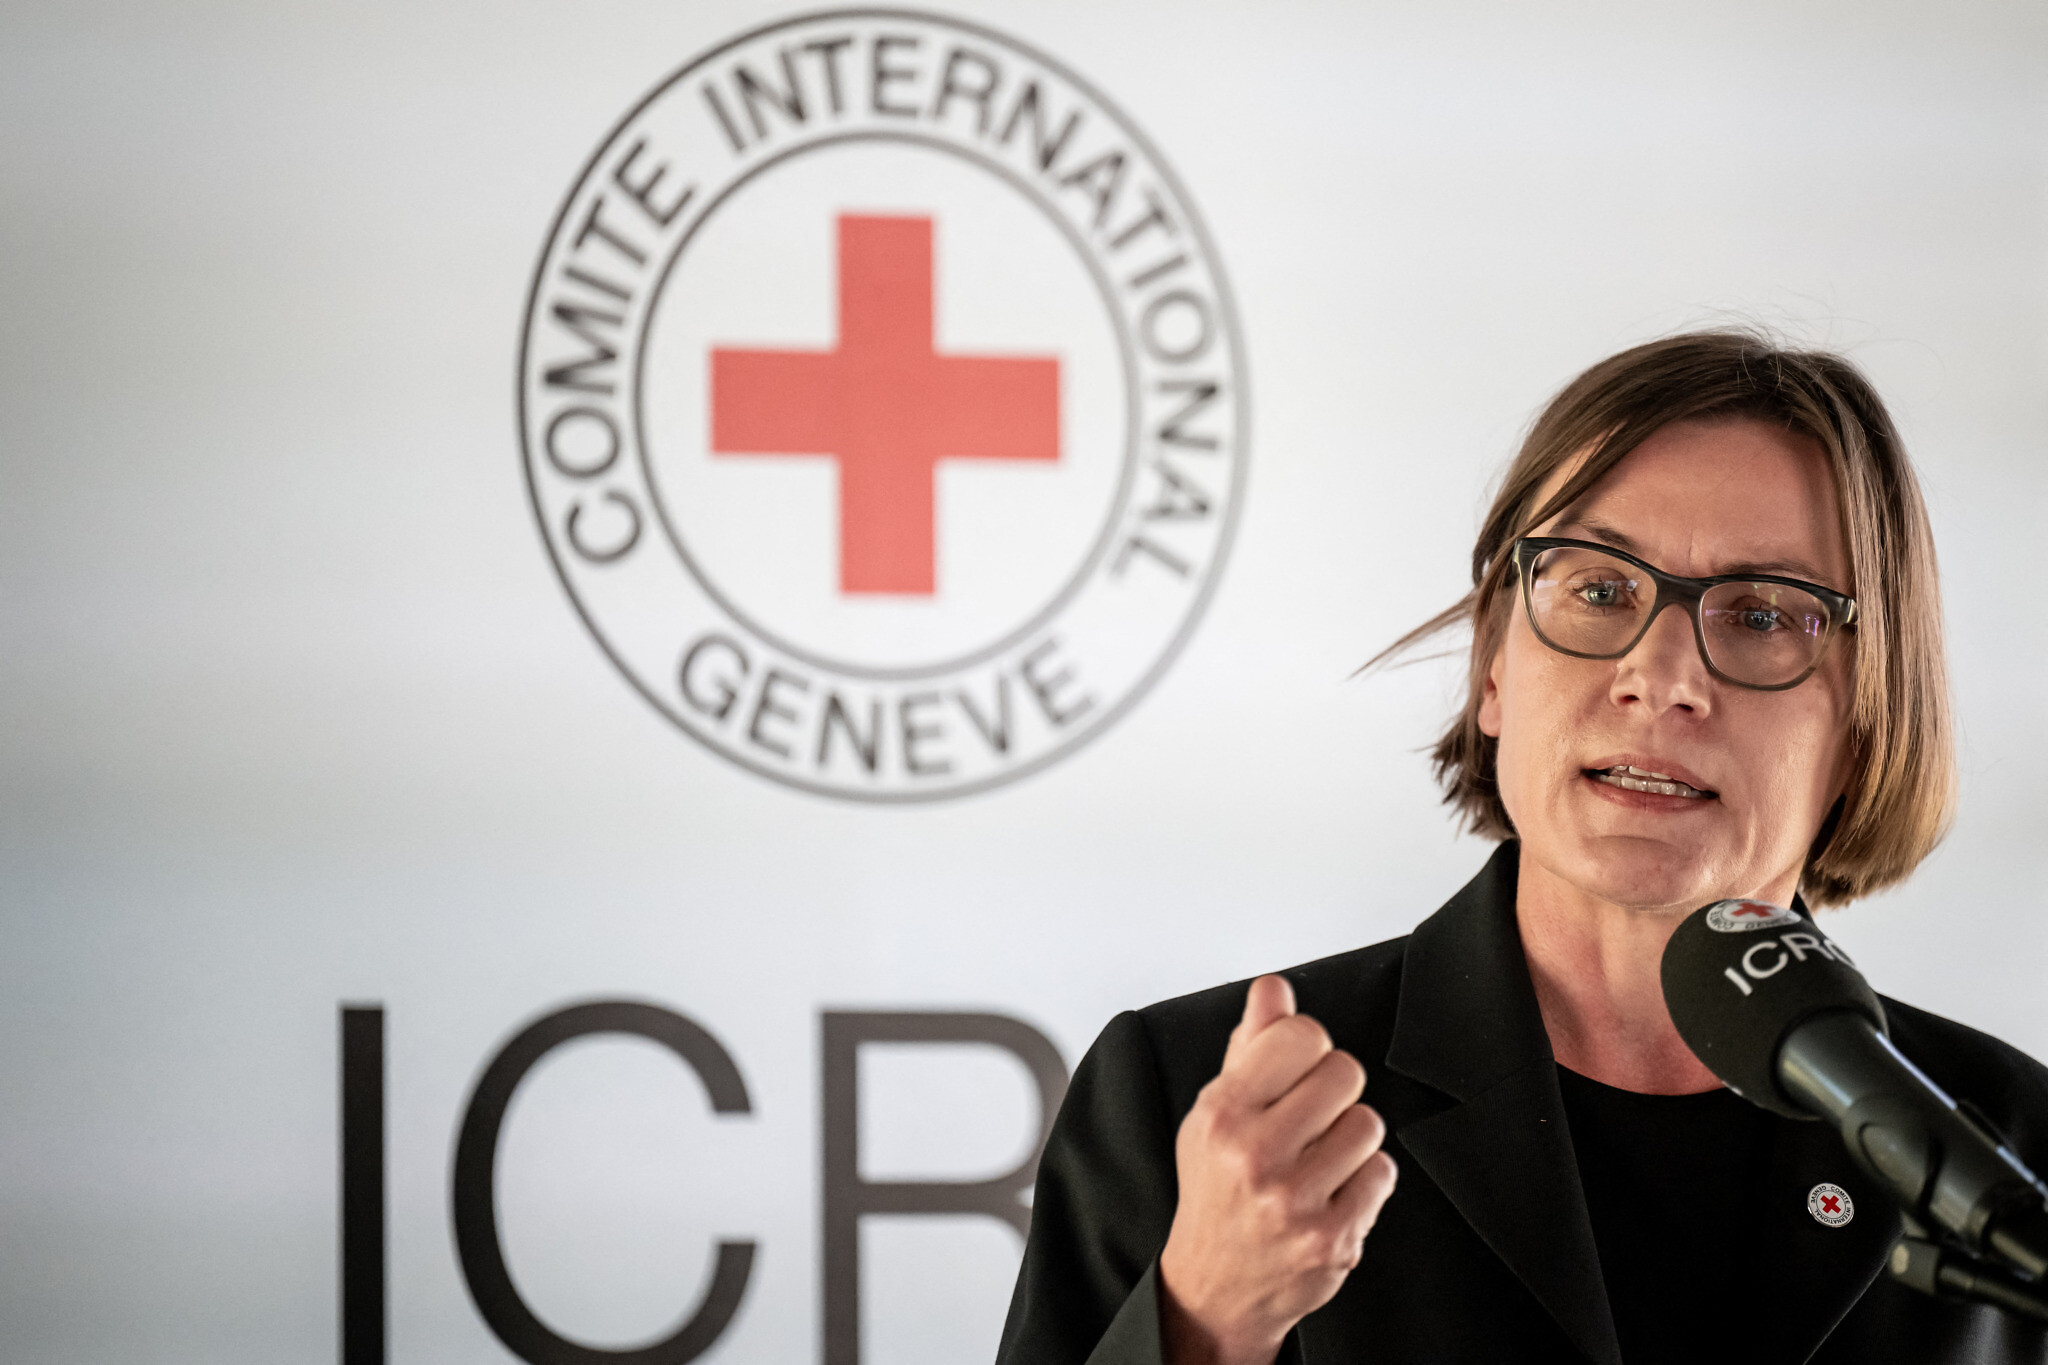 Visiting Gaza, Red Cross chief says suffering 'intolerable,' ICRC